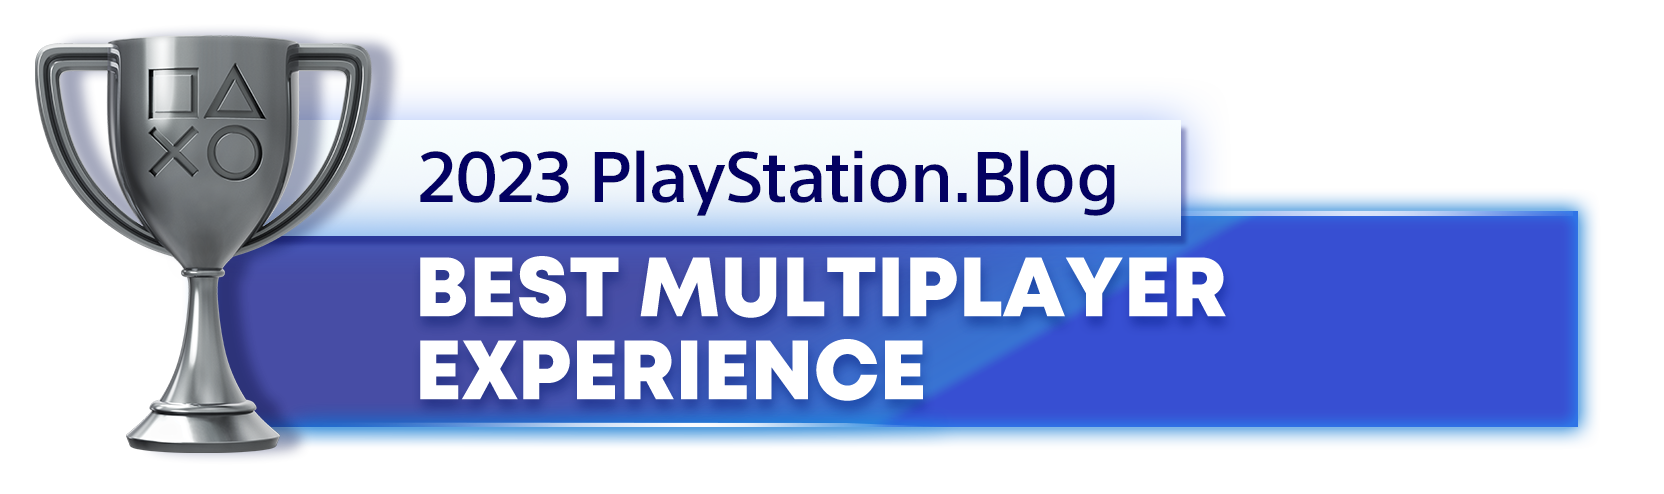  "Silver Trophy for the 2023 PlayStation Blog Best Multiplayer Experience Winner"